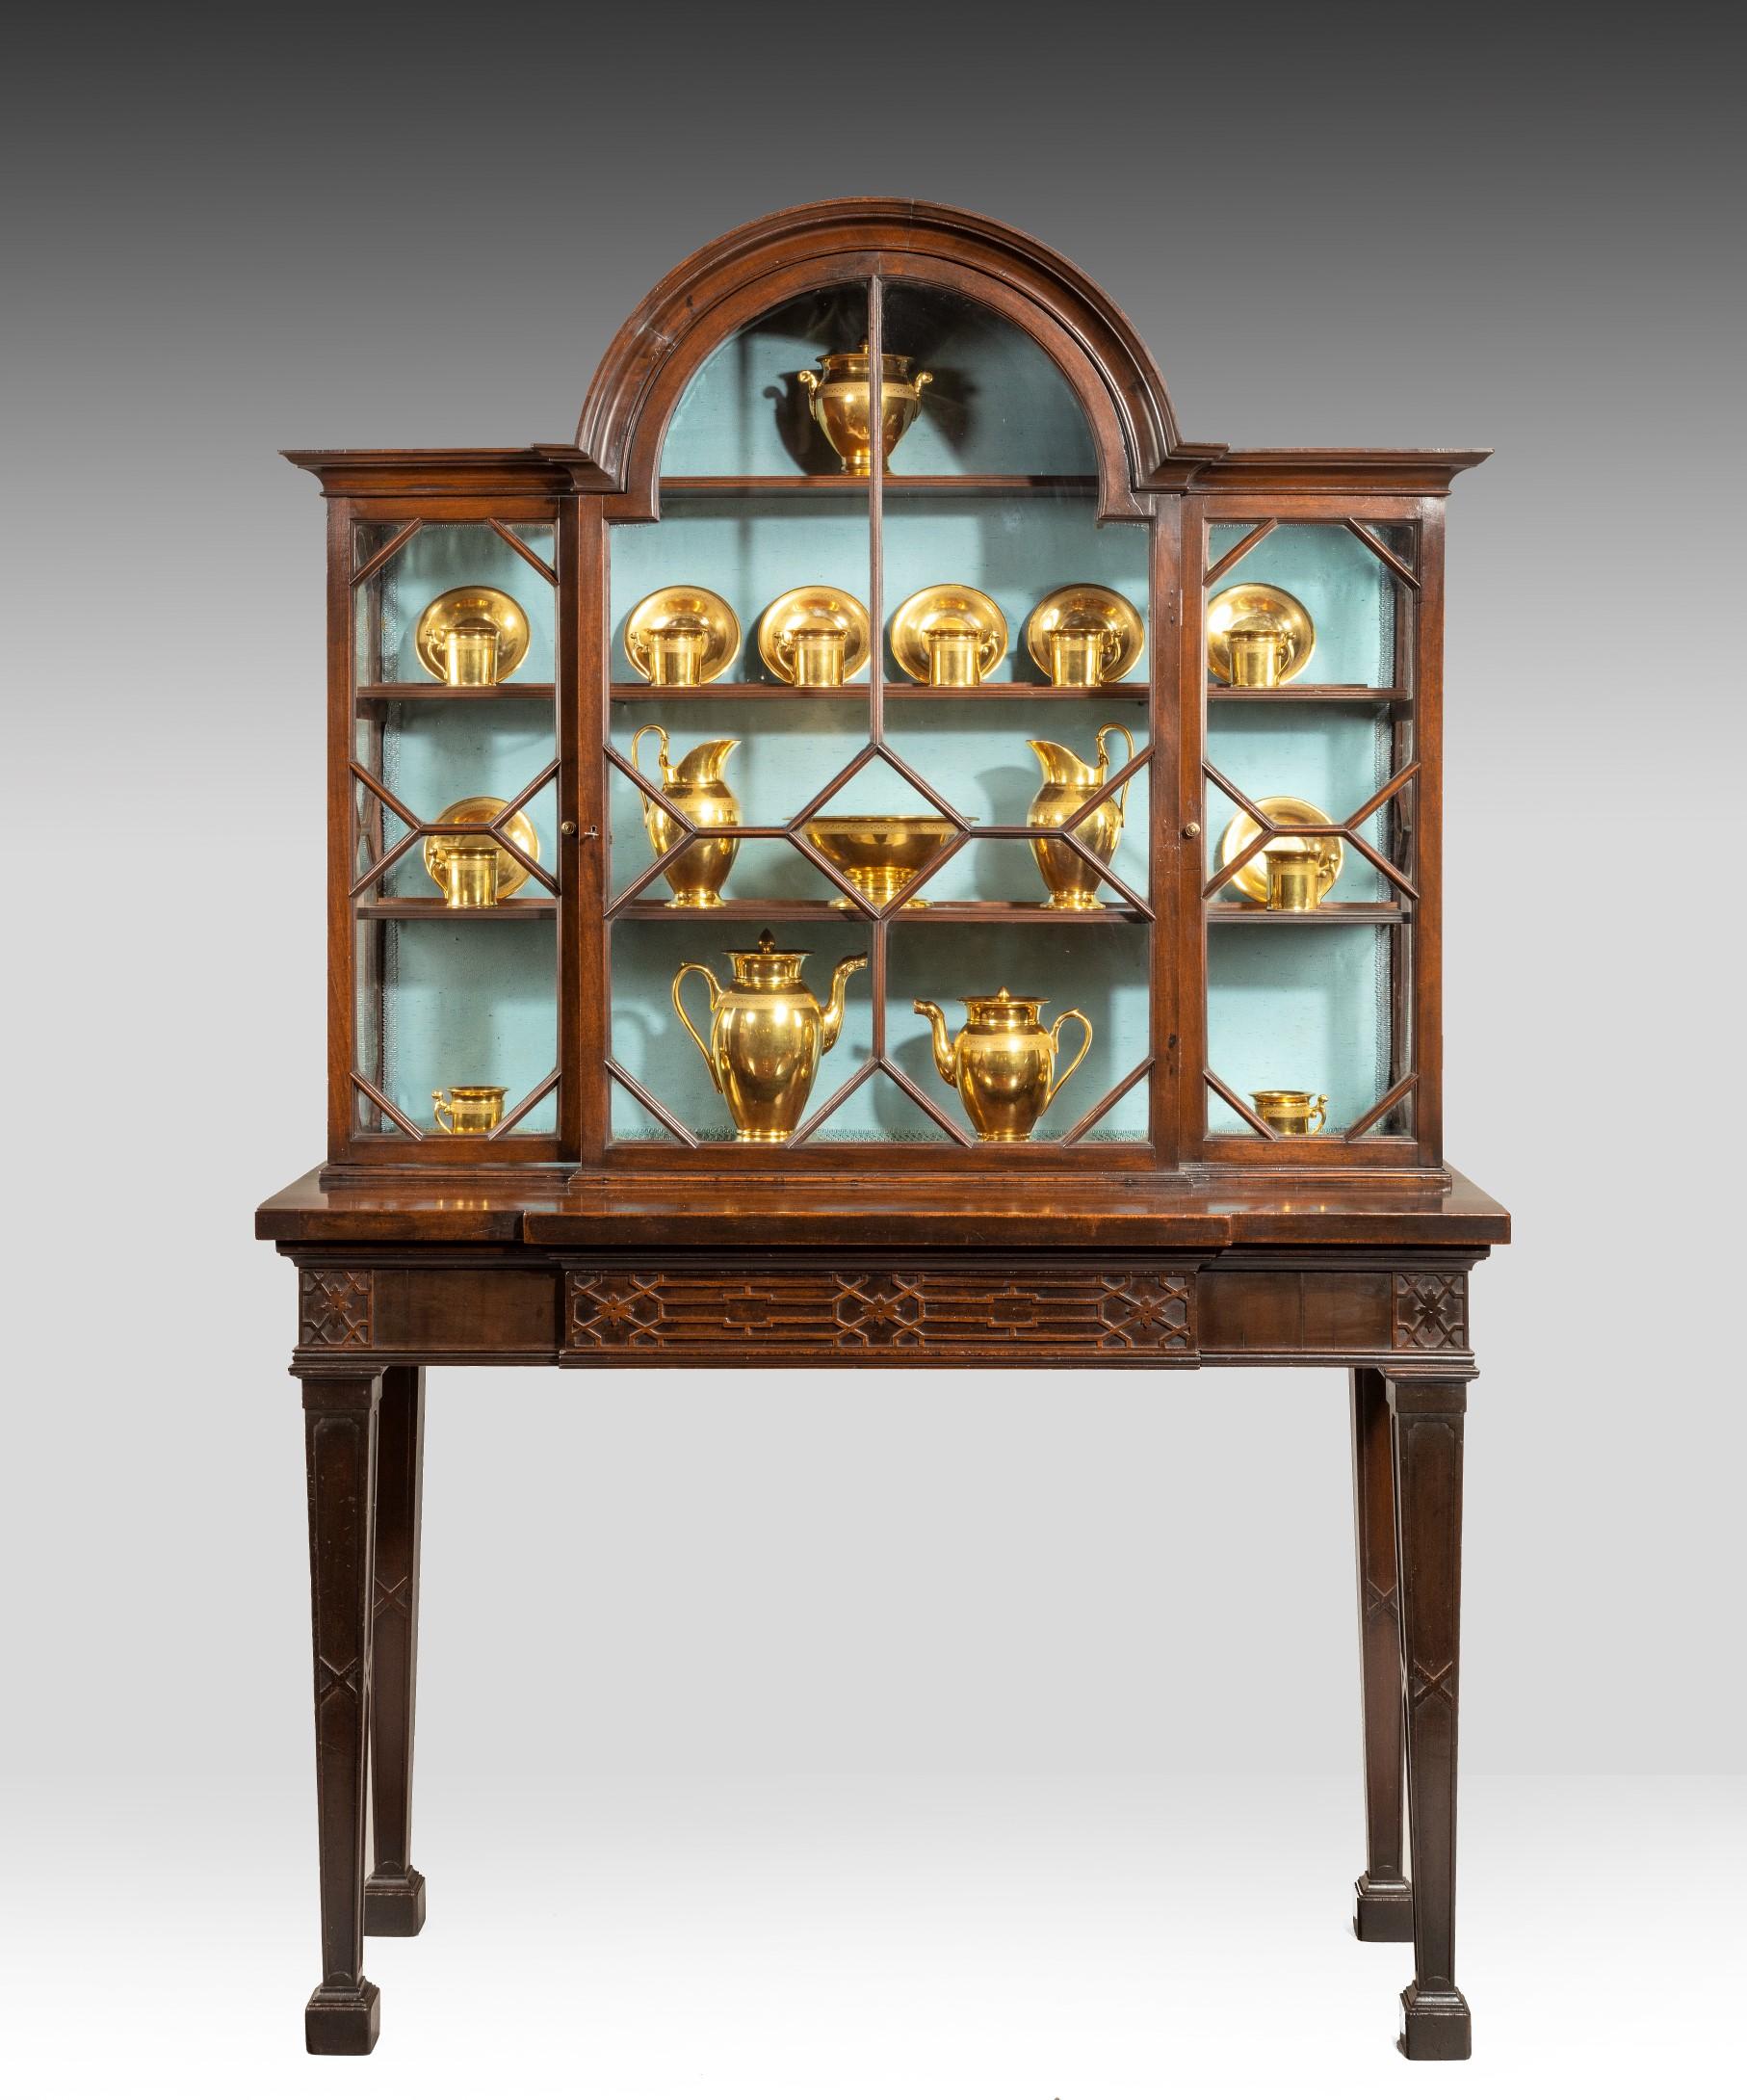 An elegant George III Chippendale period mahogany breakfront china cabinet: the glazed upper section with a central arched door flanked by a pair of doors each with geometric bullnose astragal glazing. The cabinet is raised on its original stand